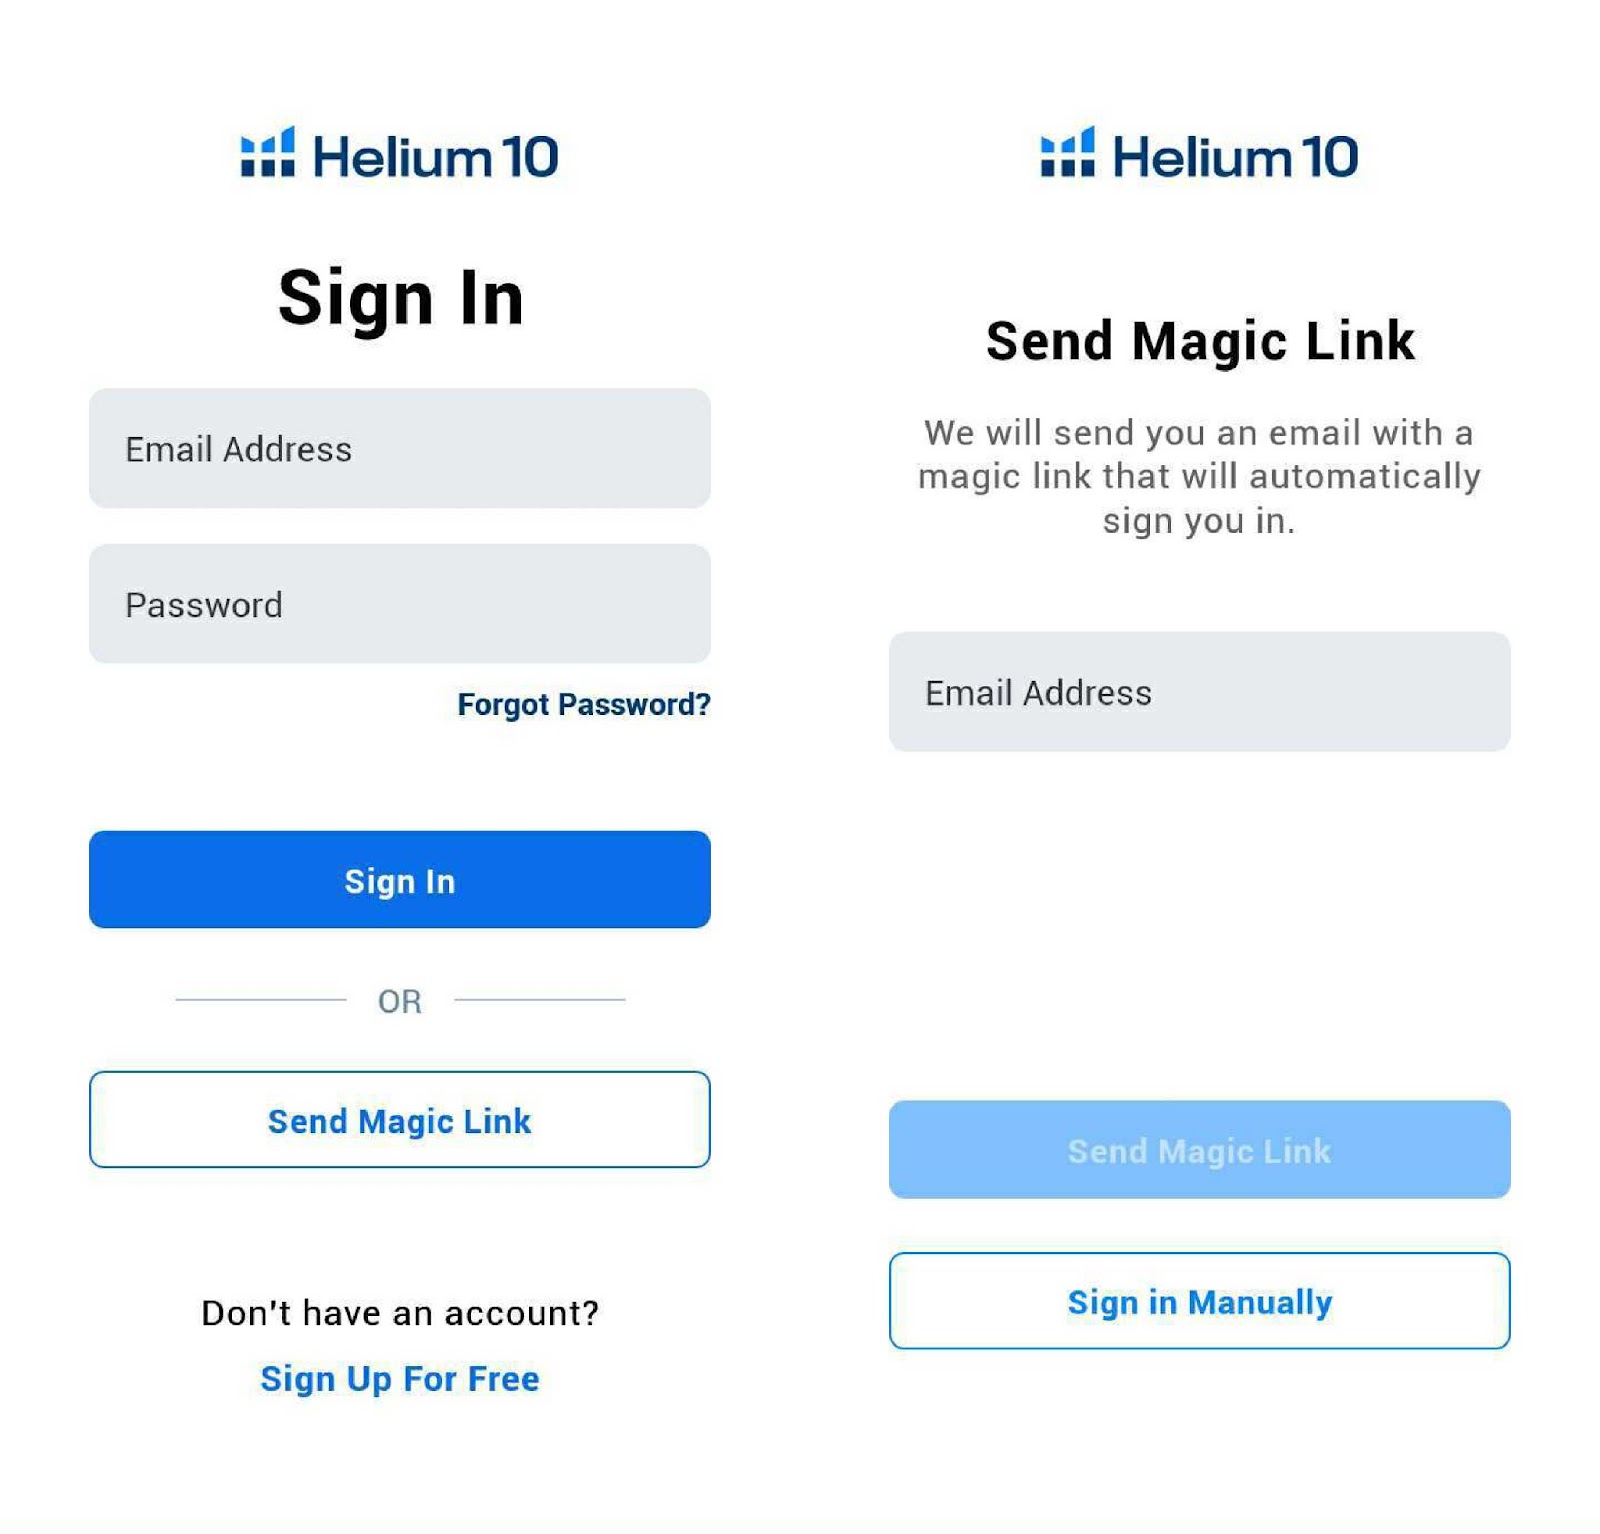 A sample of the Sign in via email address screen and the Magic Link screen.